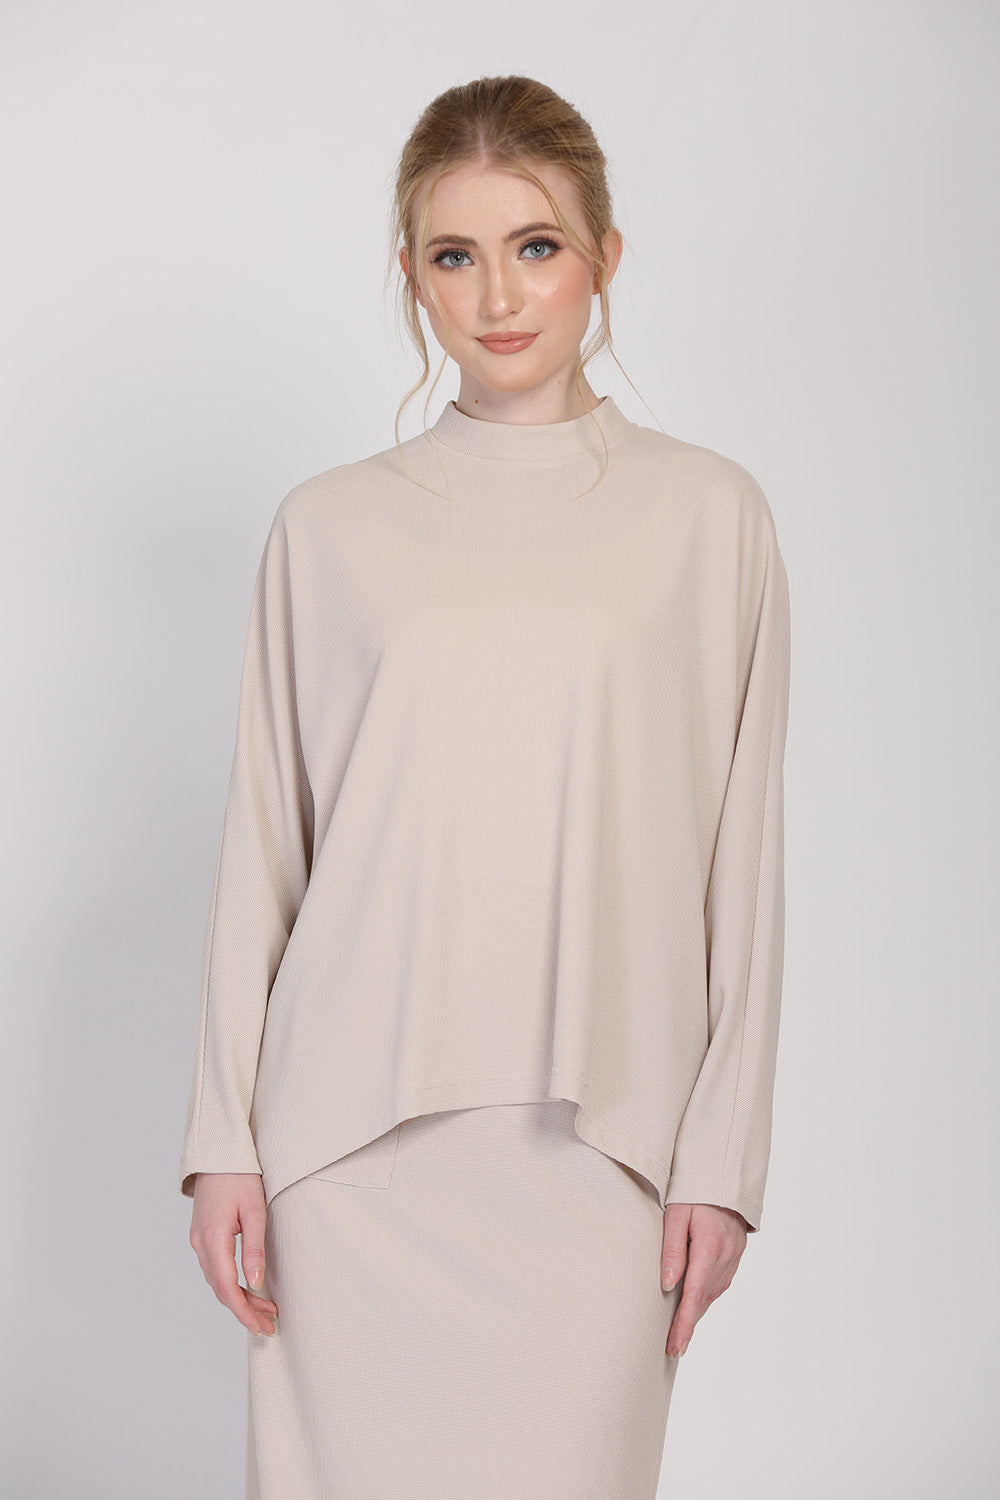 The Cahaya Knit Top in Apricot